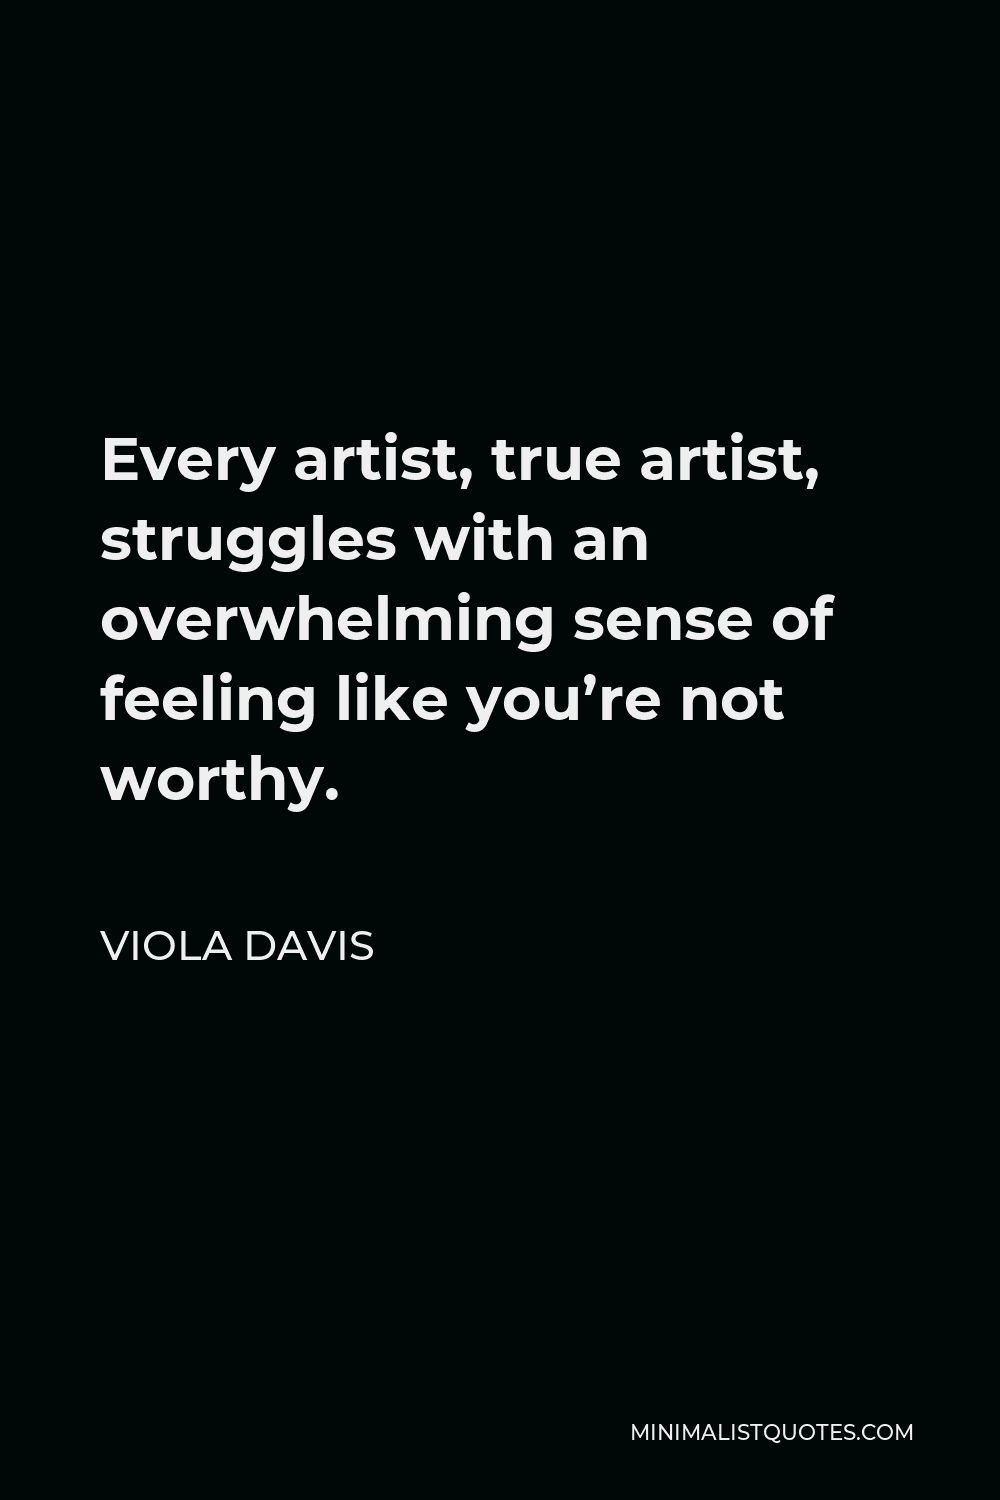 Viola Davis Quote - Every artist, true artist, struggles with an overwhelming sense of feeling like you’re not worthy.